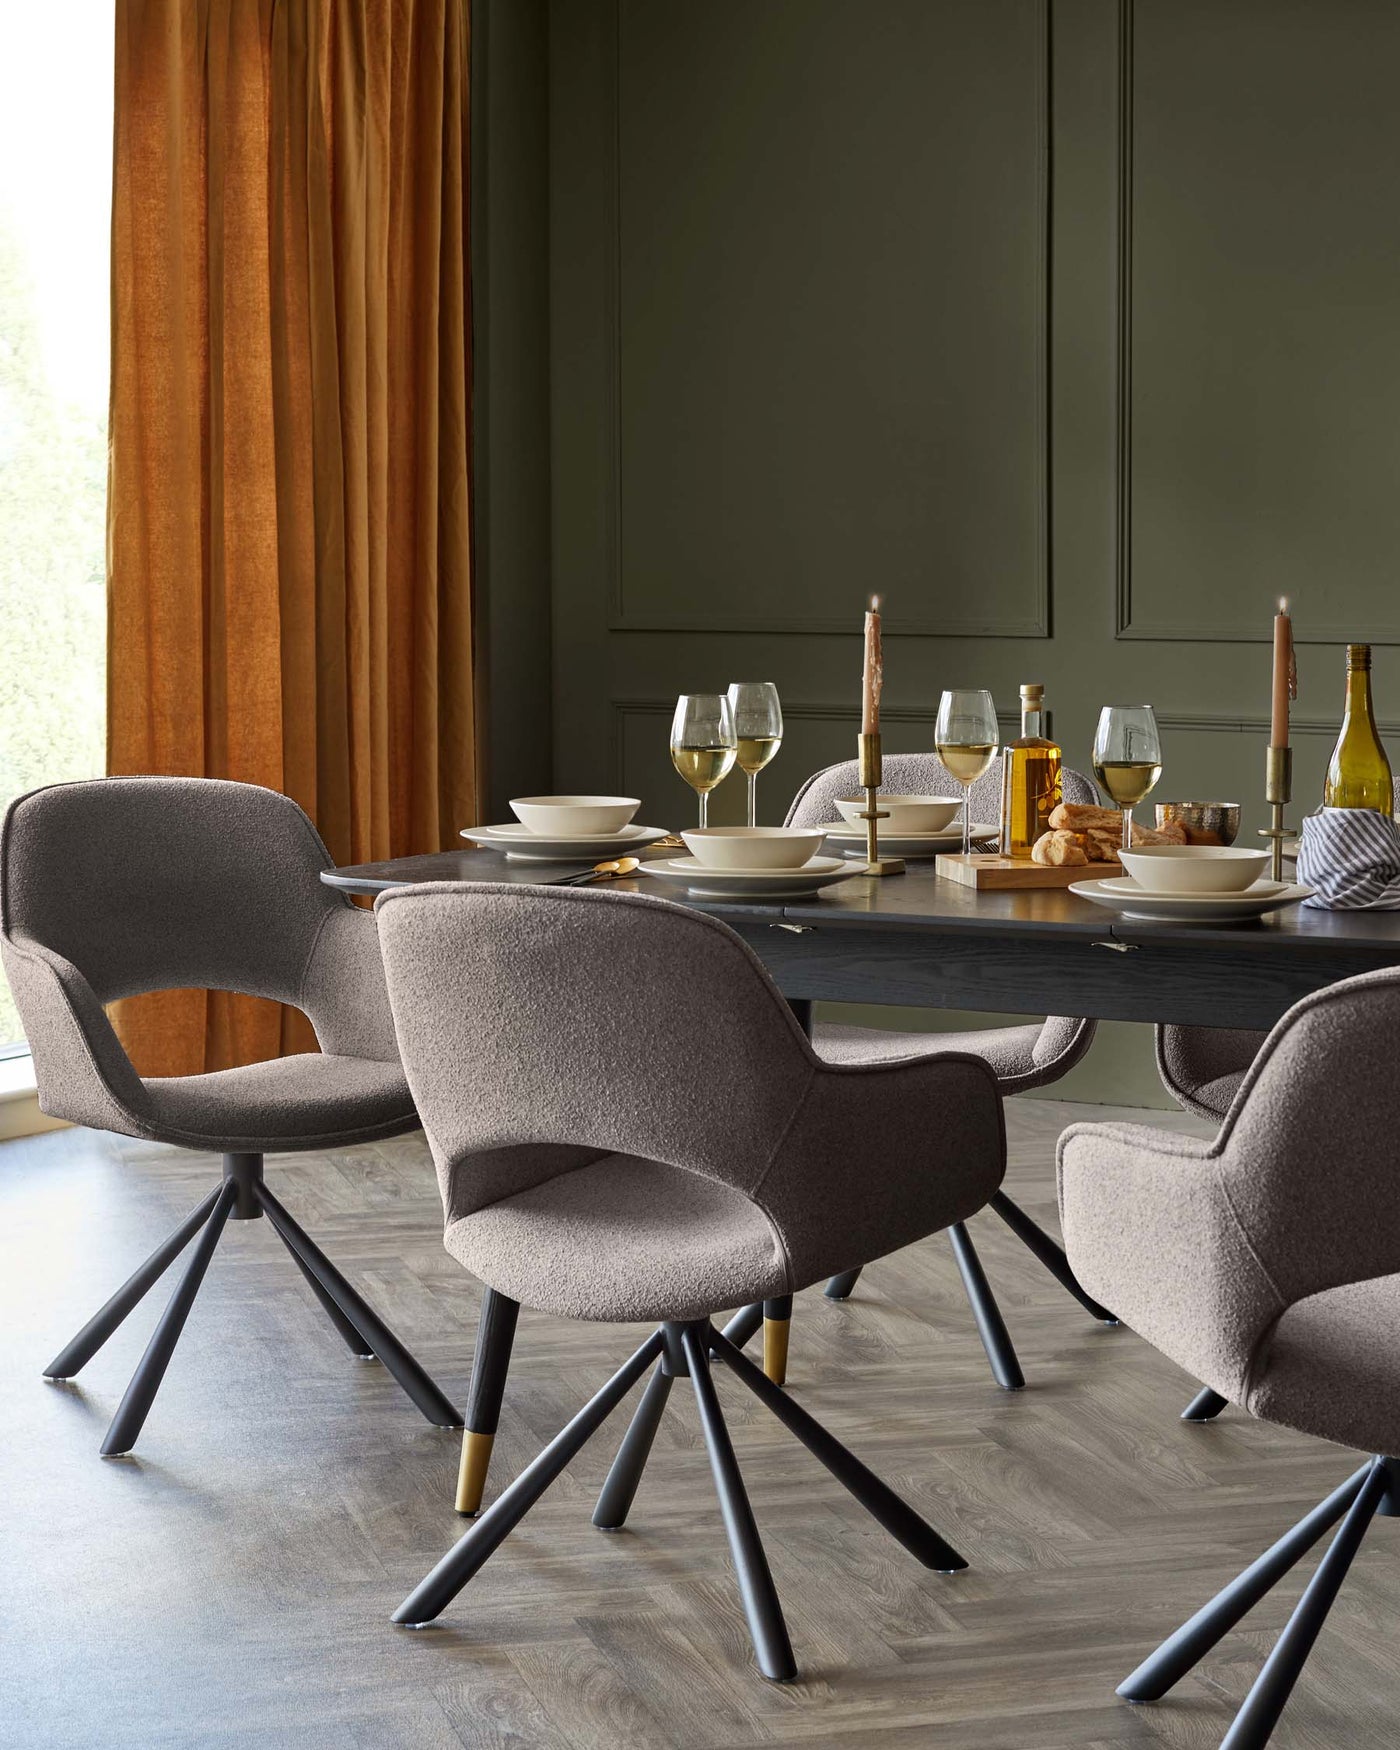 clover dining table marlow dining chair set